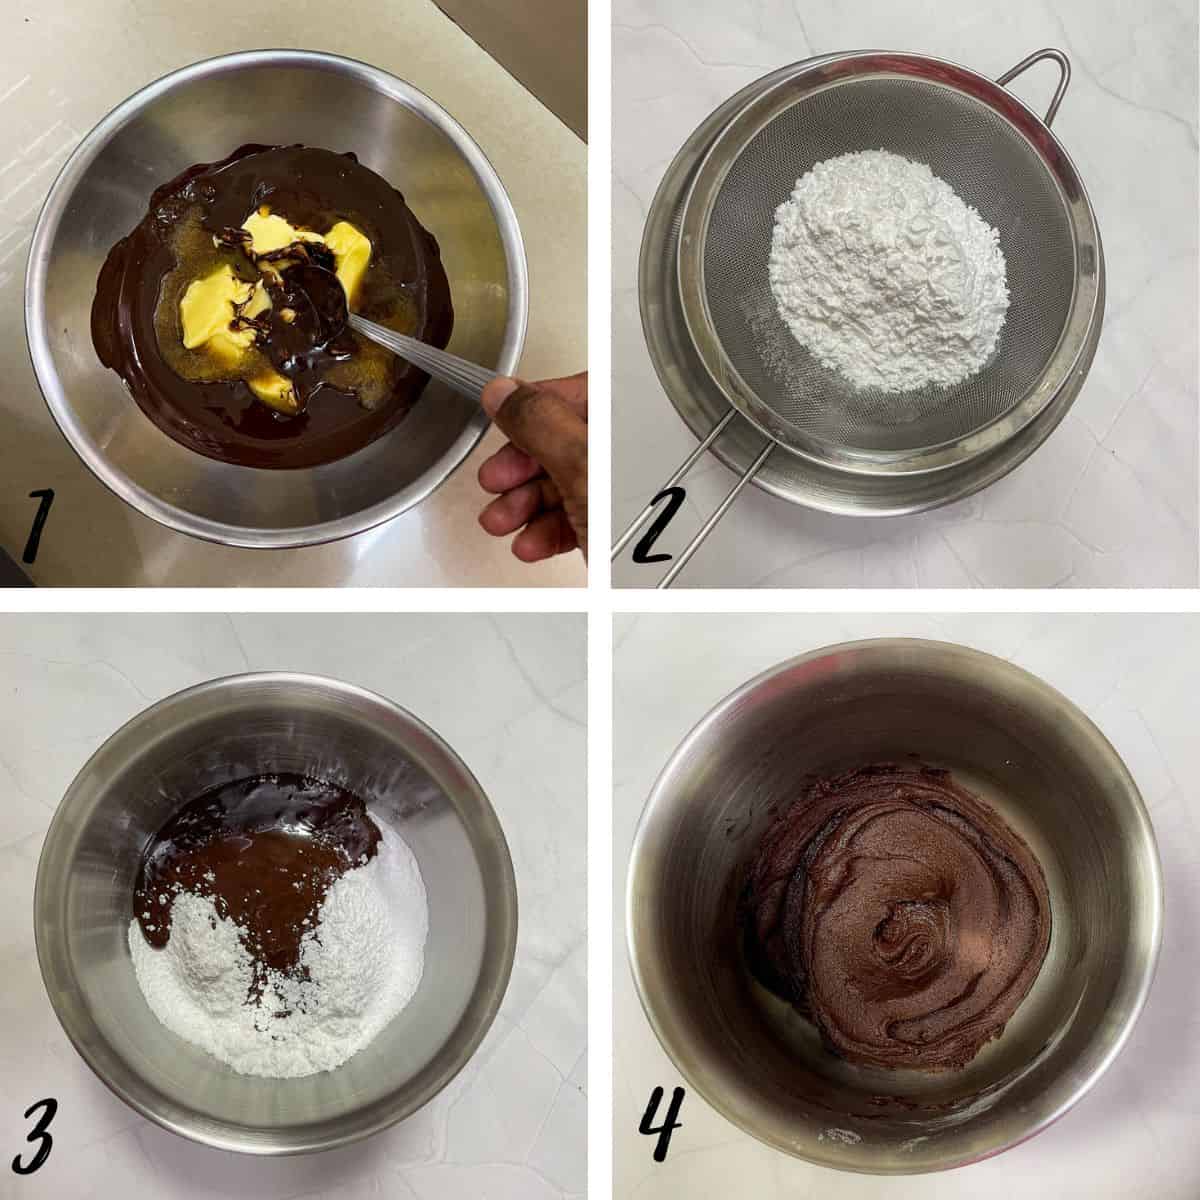 A poster of 4 images showing how to mix melted chocolate with powdered sugar to make chocolate frosting.